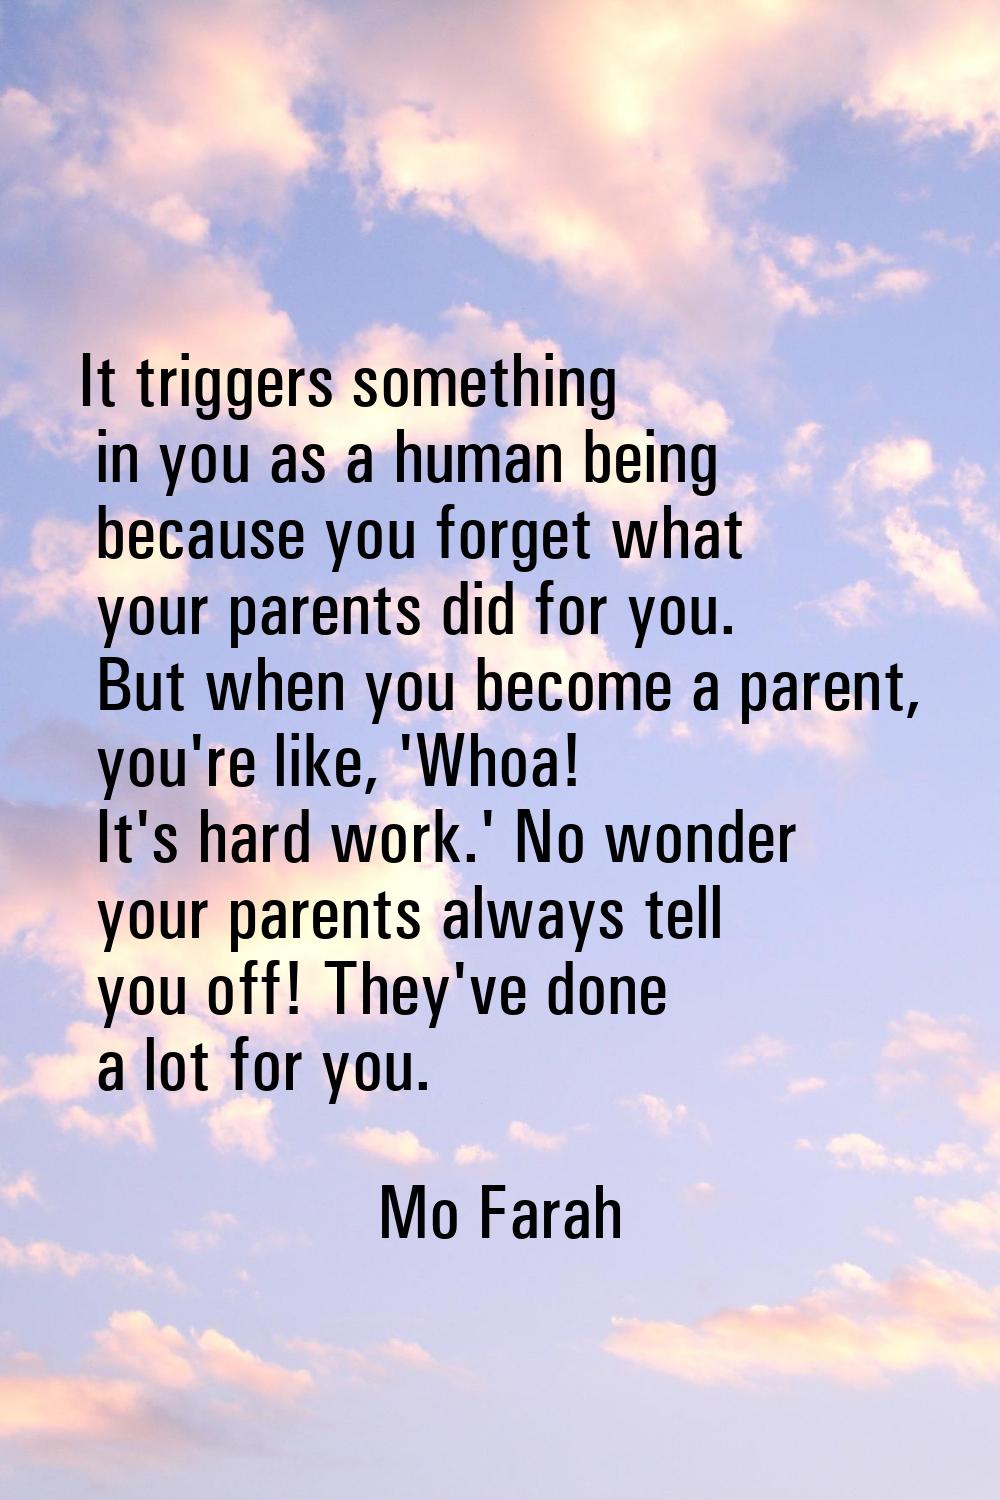 It triggers something in you as a human being because you forget what your parents did for you. But